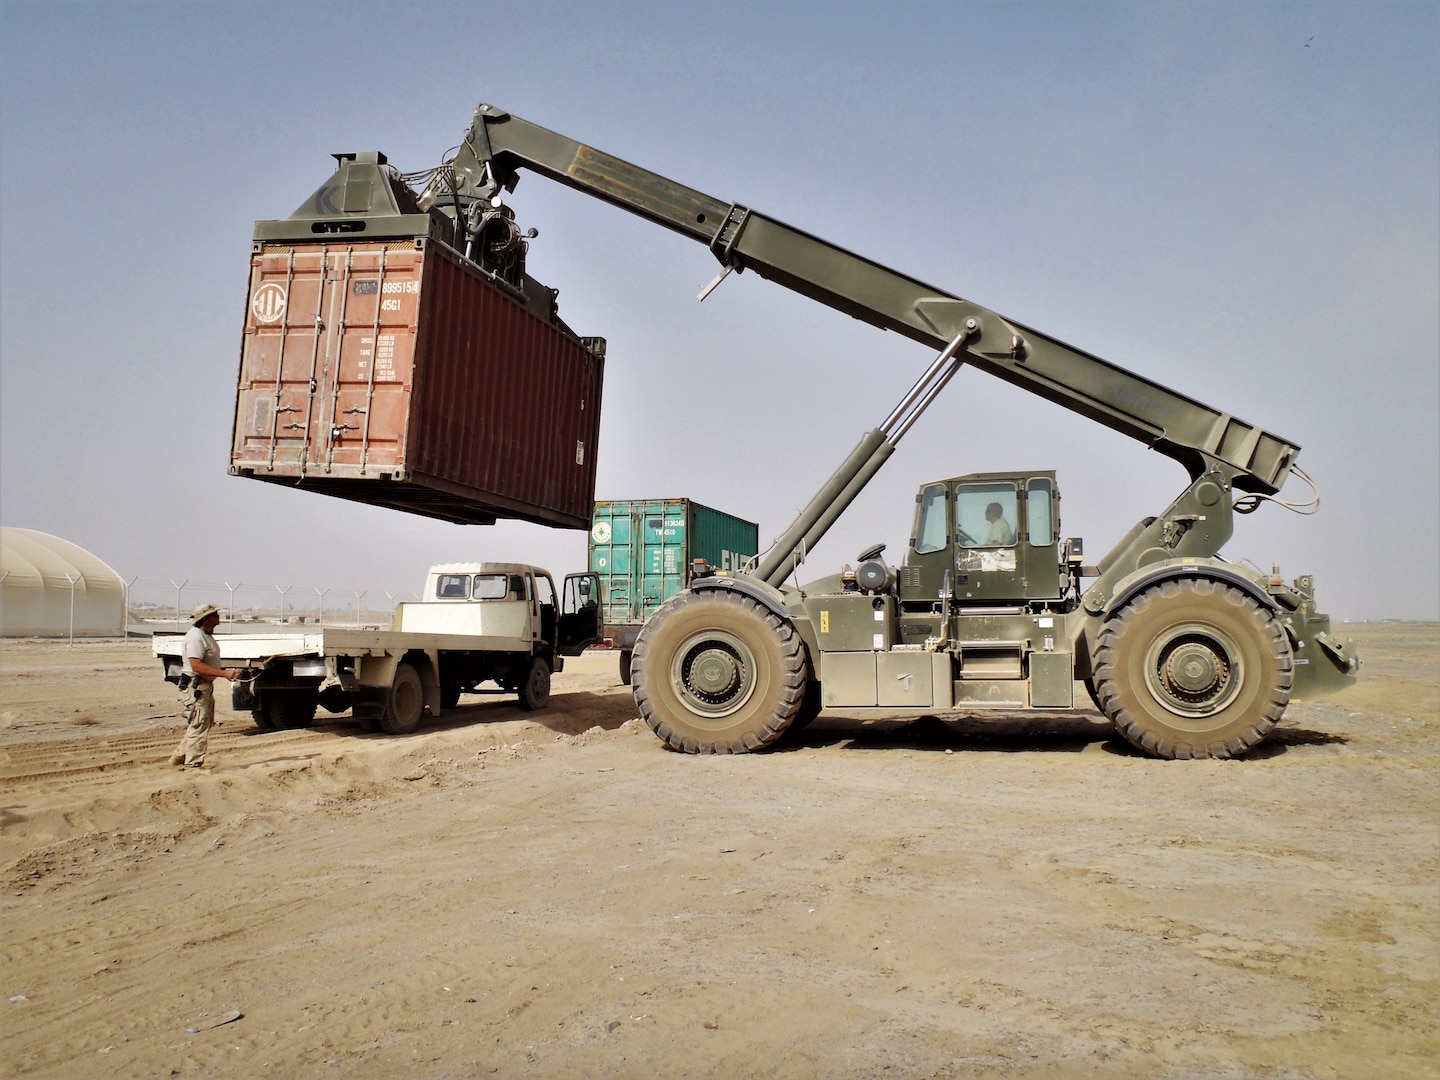 A container of supplies is lifted onto a local truck for delivery to customers in Kandahar, Afghanistan. DLA Distribution and DLA Disposition Services employees continue to volunteer for deployments to Afghanistan so they can have a direct and quick impact on military missions there.